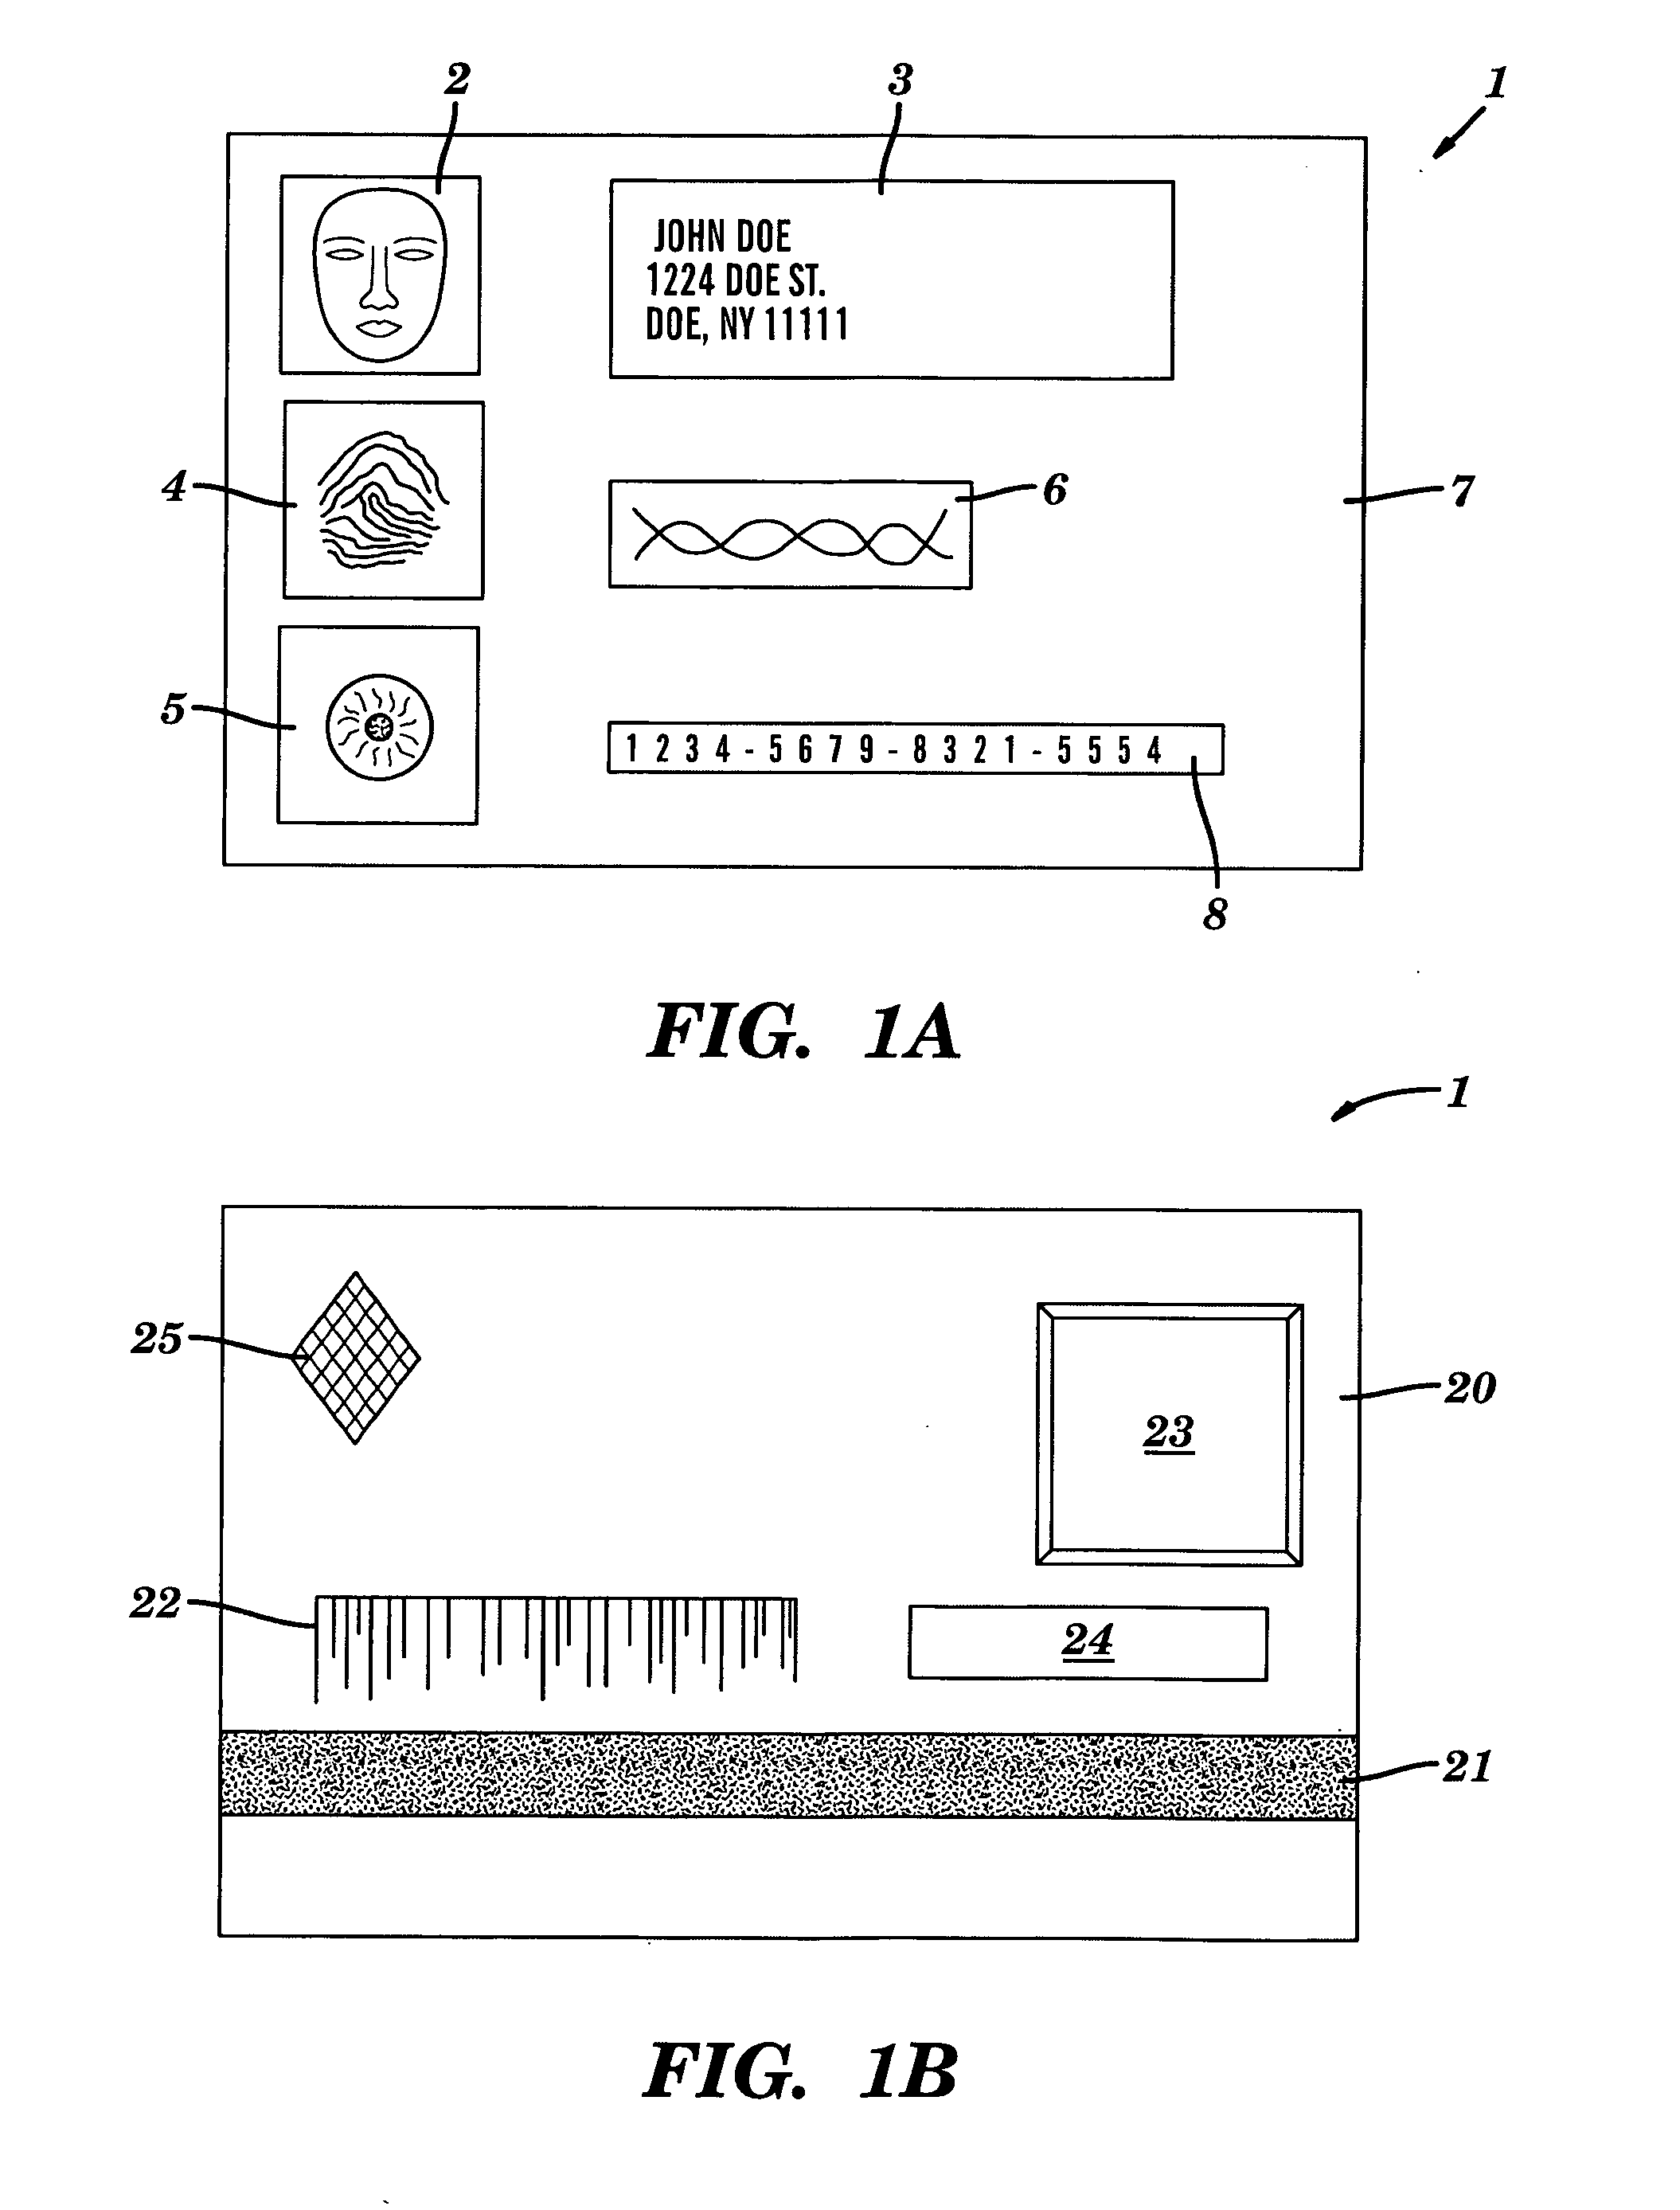 Methods for transaction processing